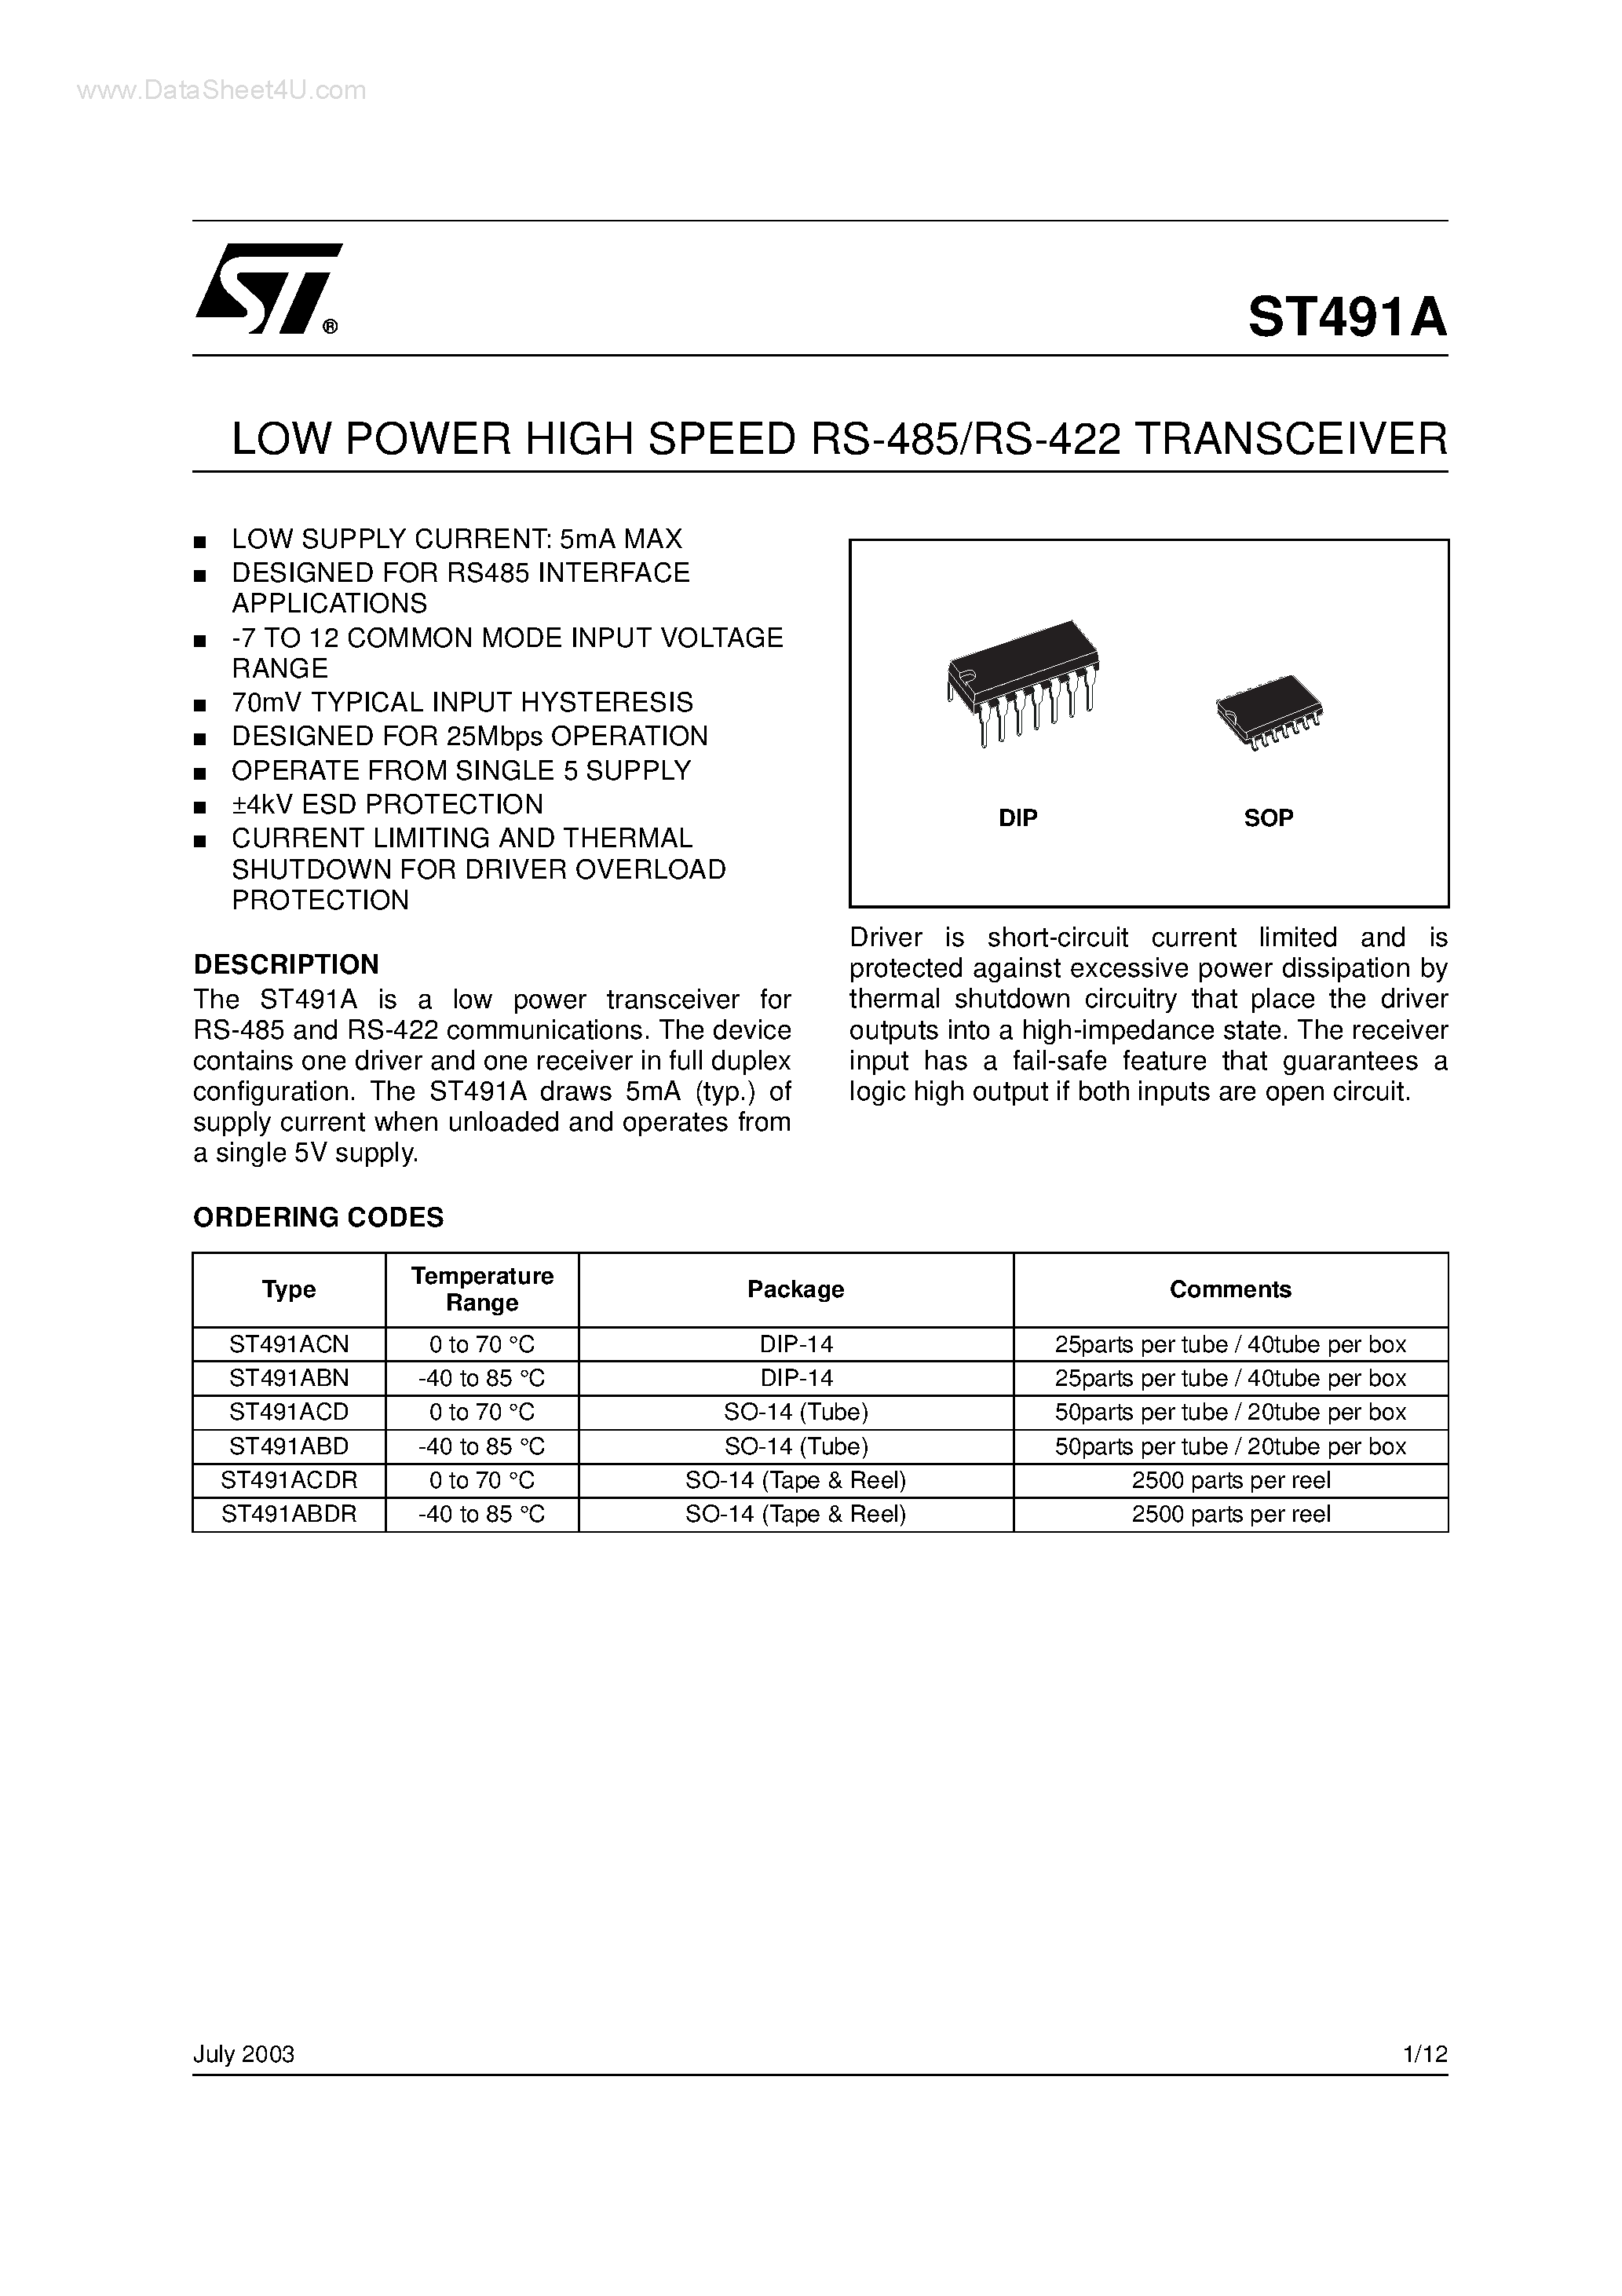 Datasheet ST491A - LOW POWER HIGH SPEED RS-485/RS-422 TRANSCEIVER page 1